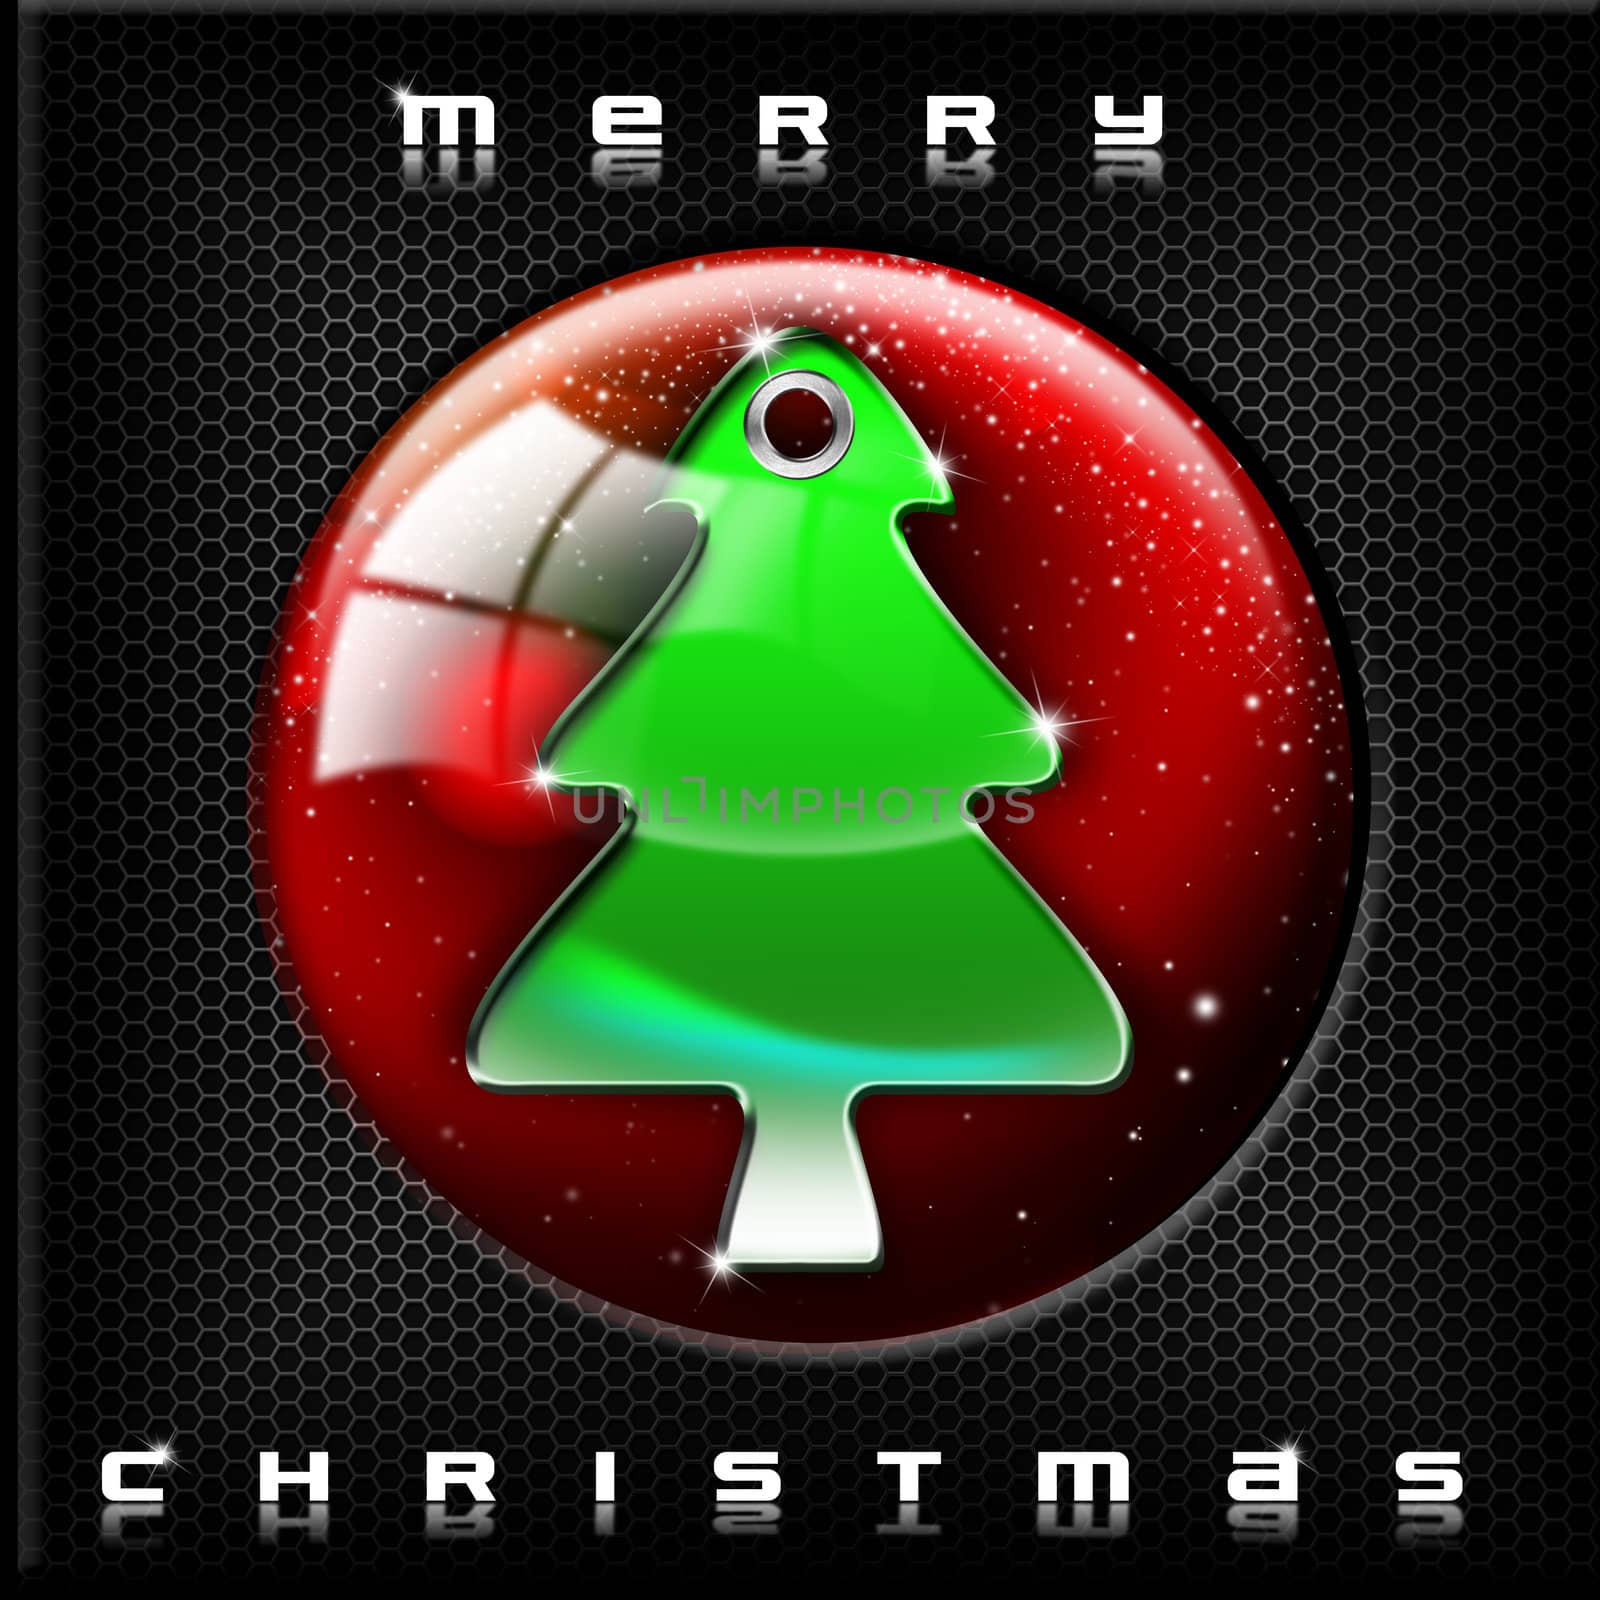 Green and stylized Christmas tree with reflections on red, black and metal background